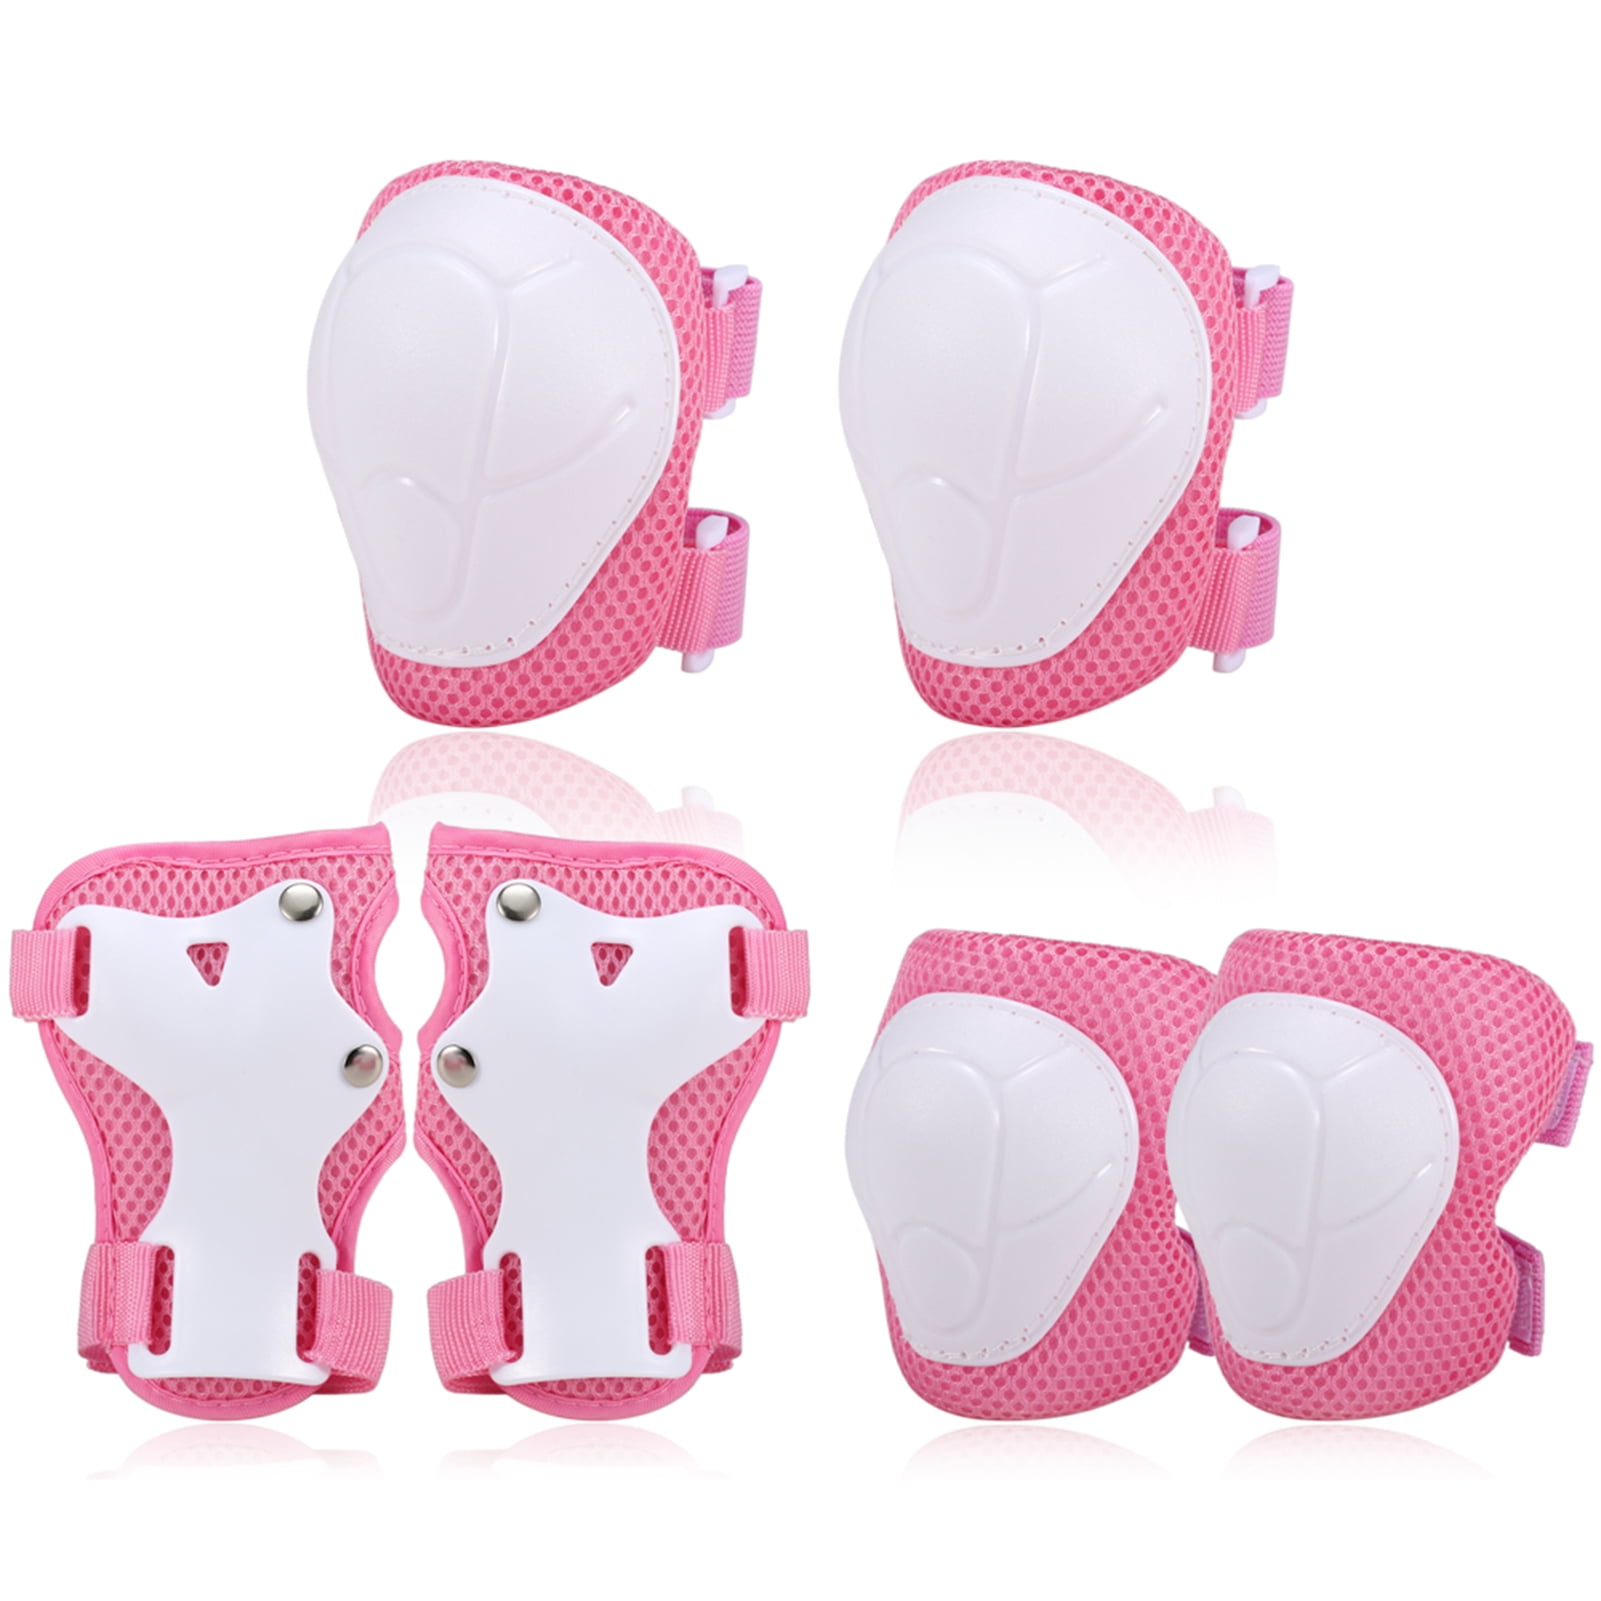 Mixfeer Knee Pads Set 6 in 1 Protective Gear Kit Knee Elbow Pads with ...